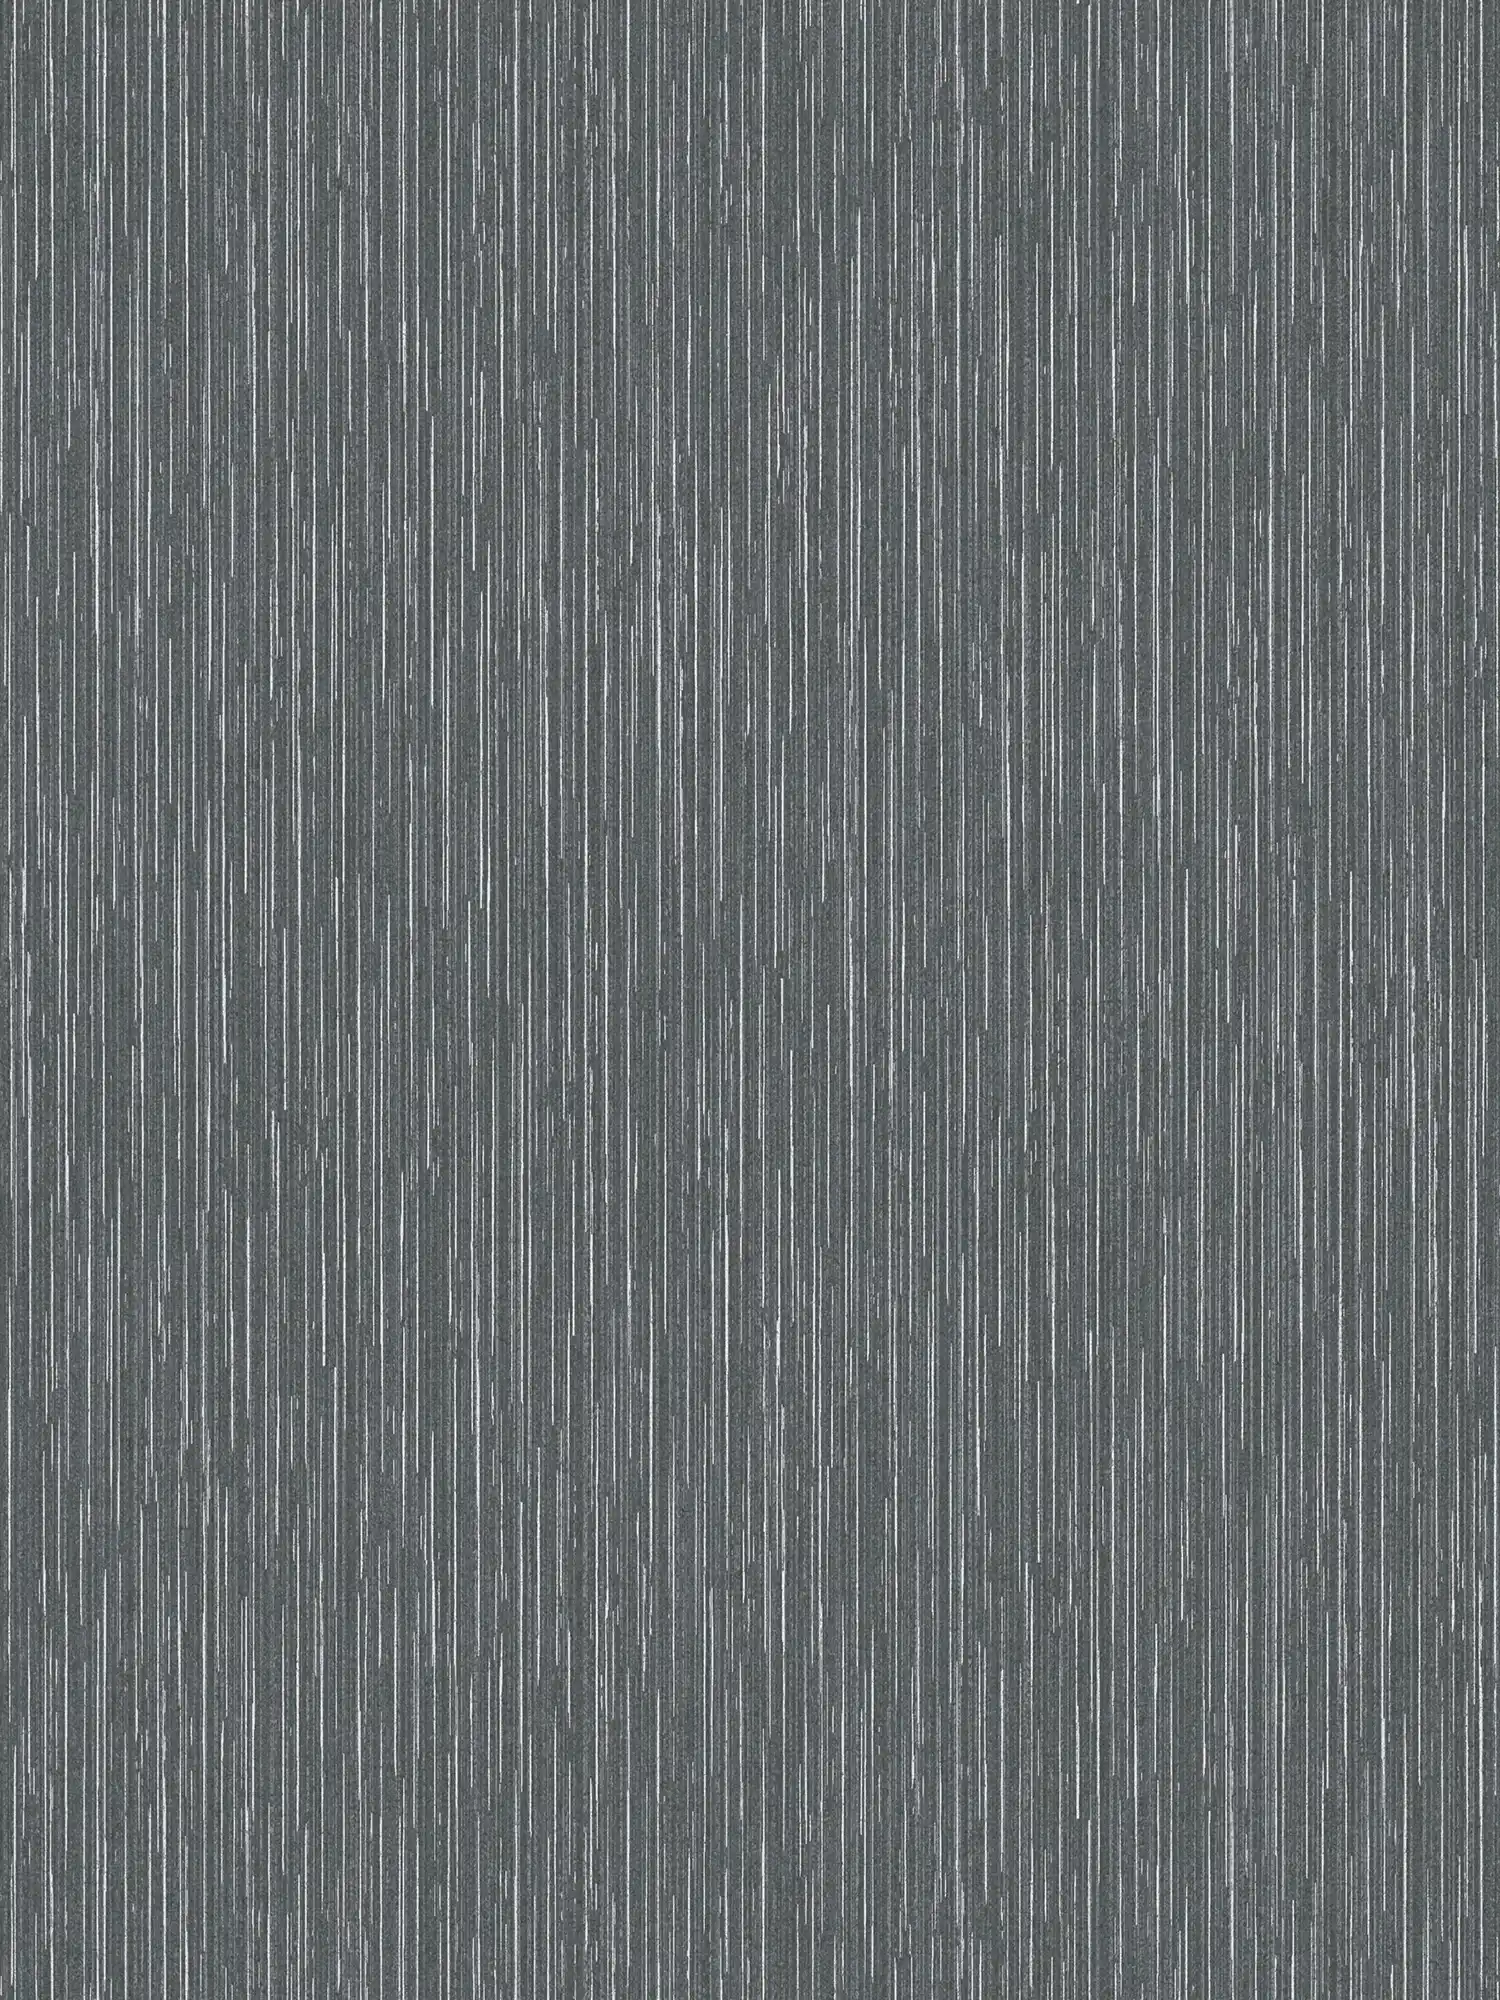 Anthracite wallpaper with silver accents & line design - black, metallic
